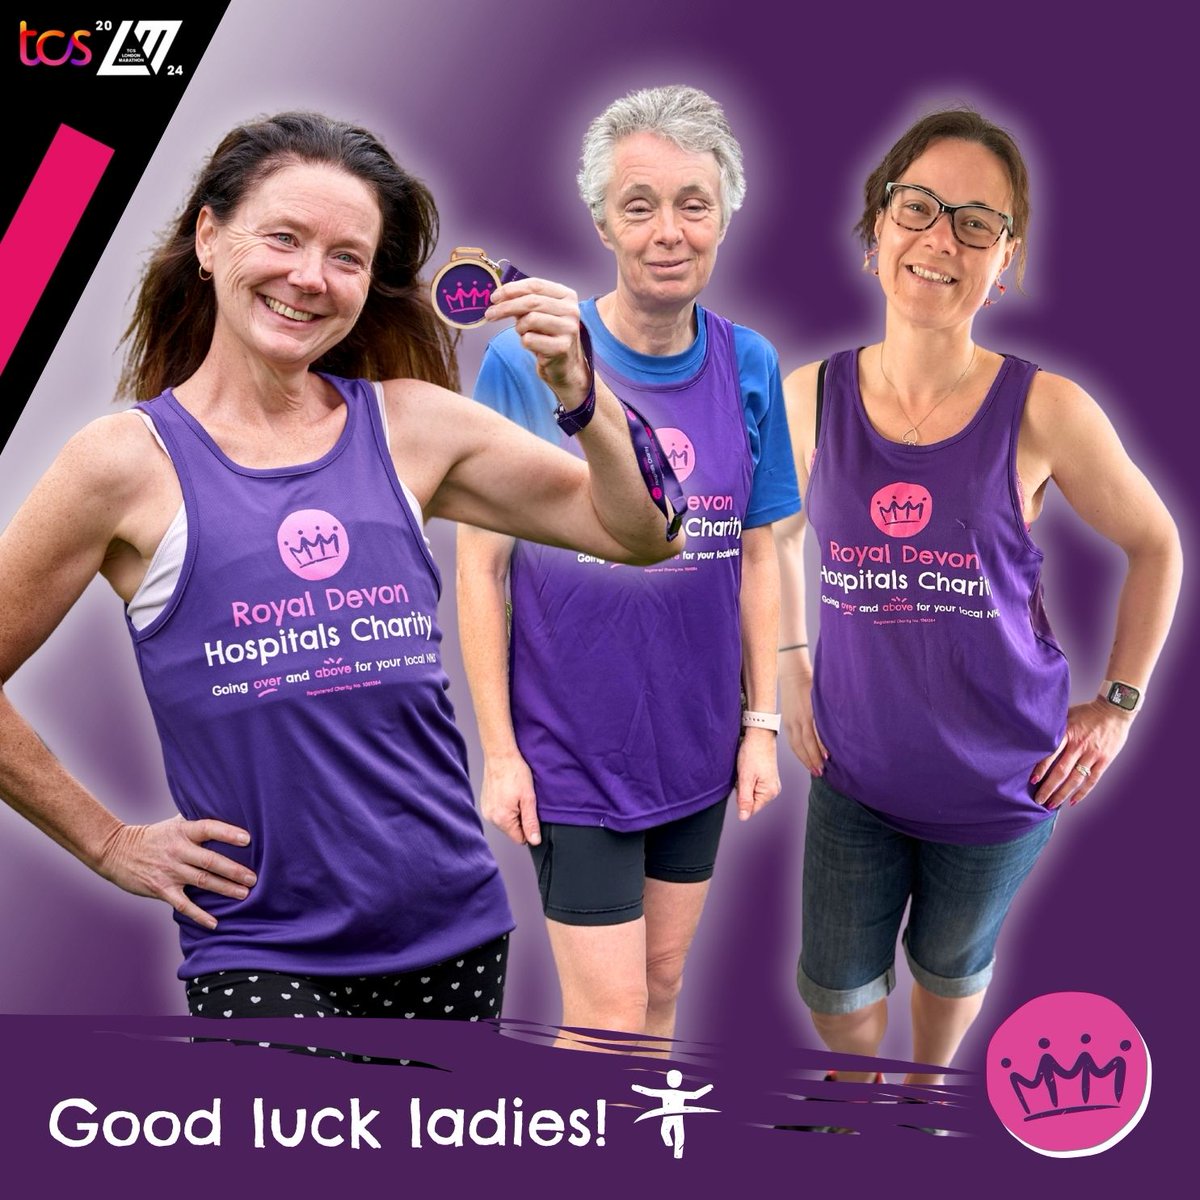 Good luck to Sarah Steed, Alex Hogg, Laura Kerr and Louise Butcher, who are taking on the BIG one in London today! 🤞🏃‍♀️💨

You are all absolute stars and we hope you have a fantastic day 🤩🙌💜

#londonmarathon #rdhc #nhscharity #lovenhs #hospitalheroes